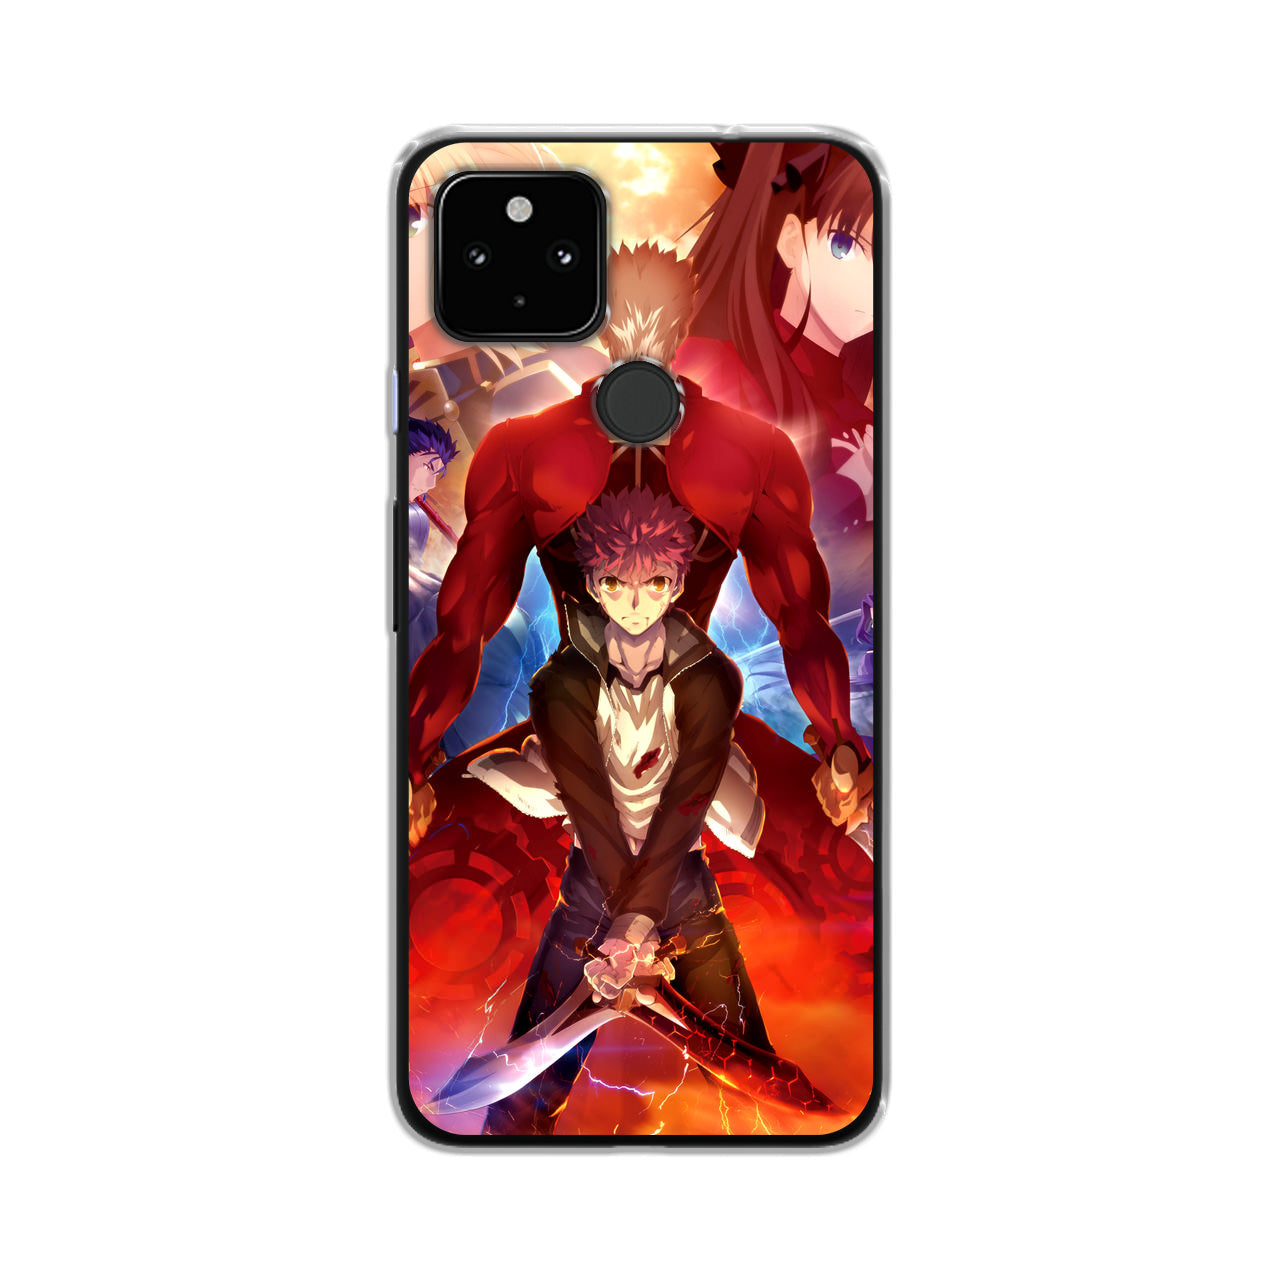 Fate/Stay Night Unlimited Blade Works Google Pixel 5 Case